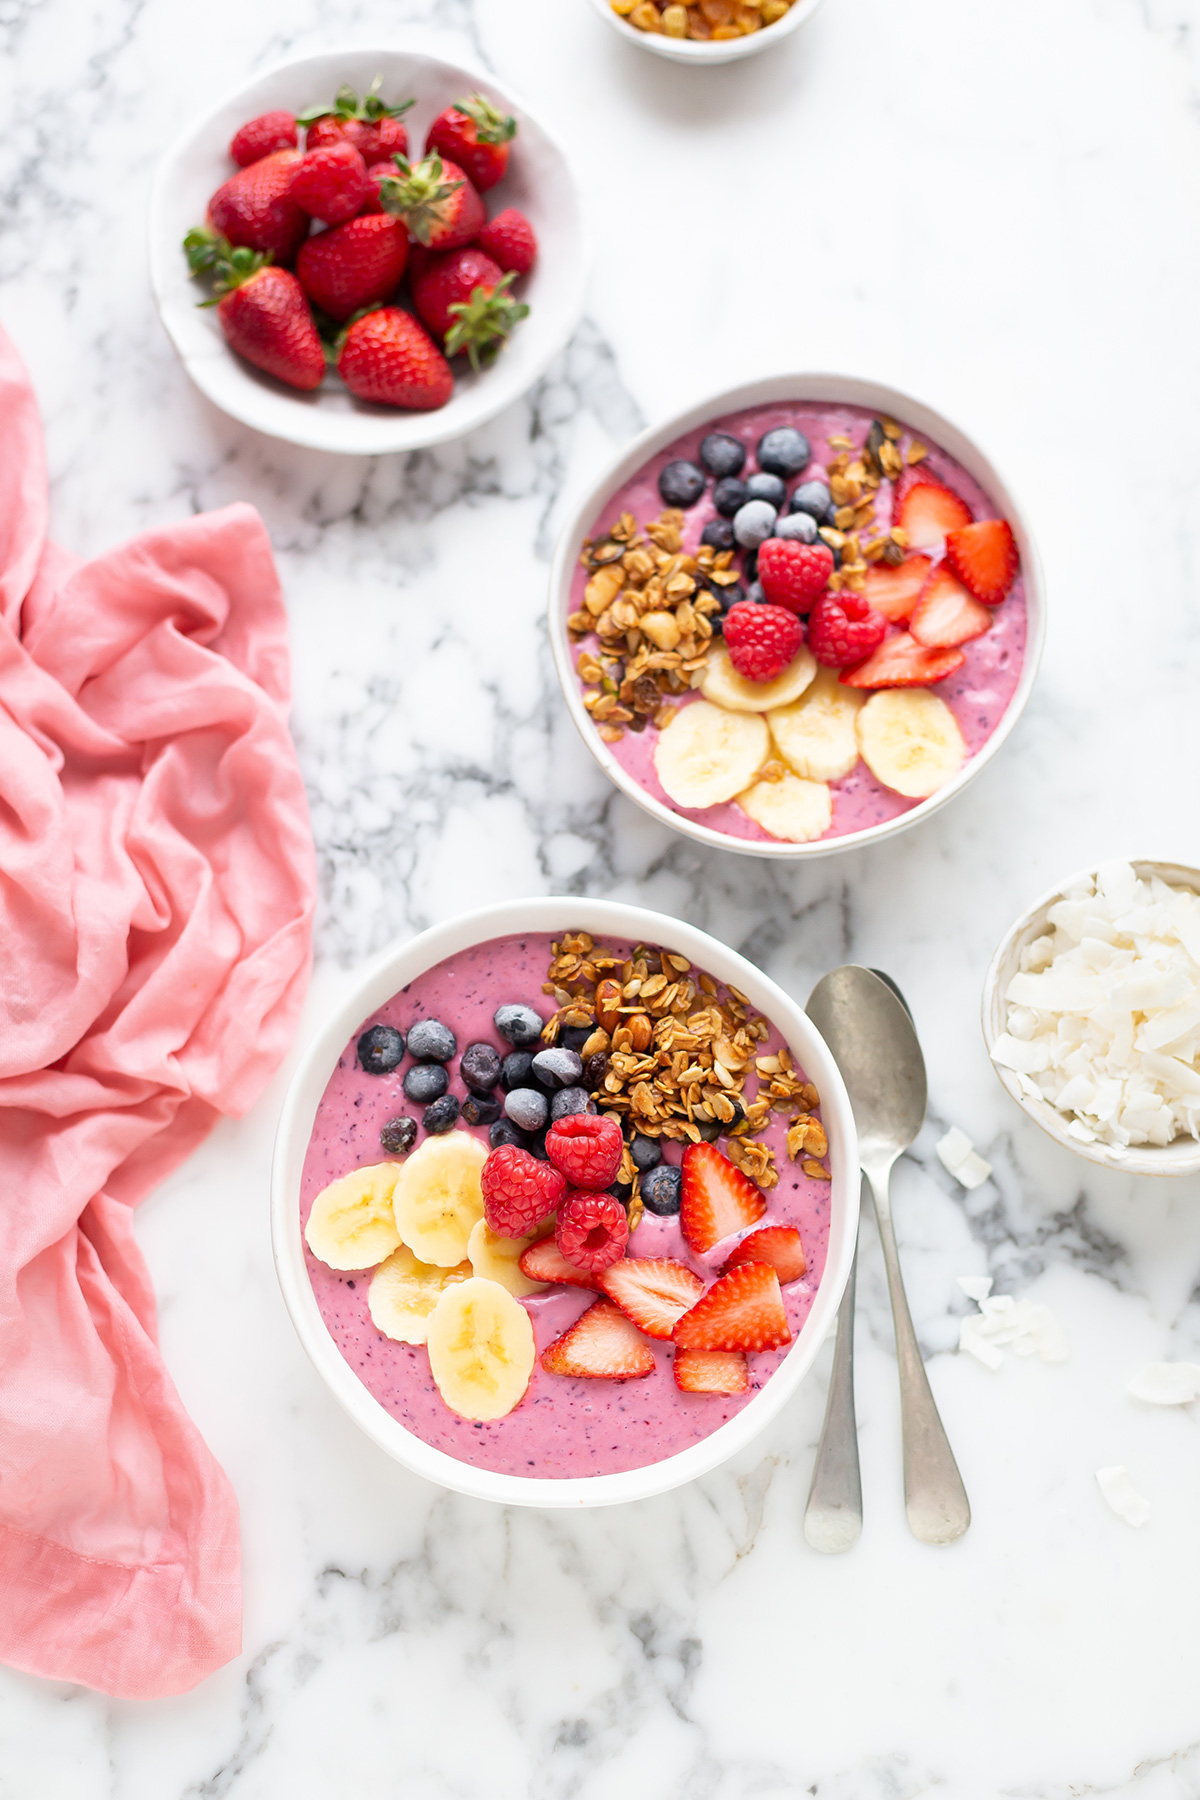 A recipe for a healthy mixed berry smoothie bowl